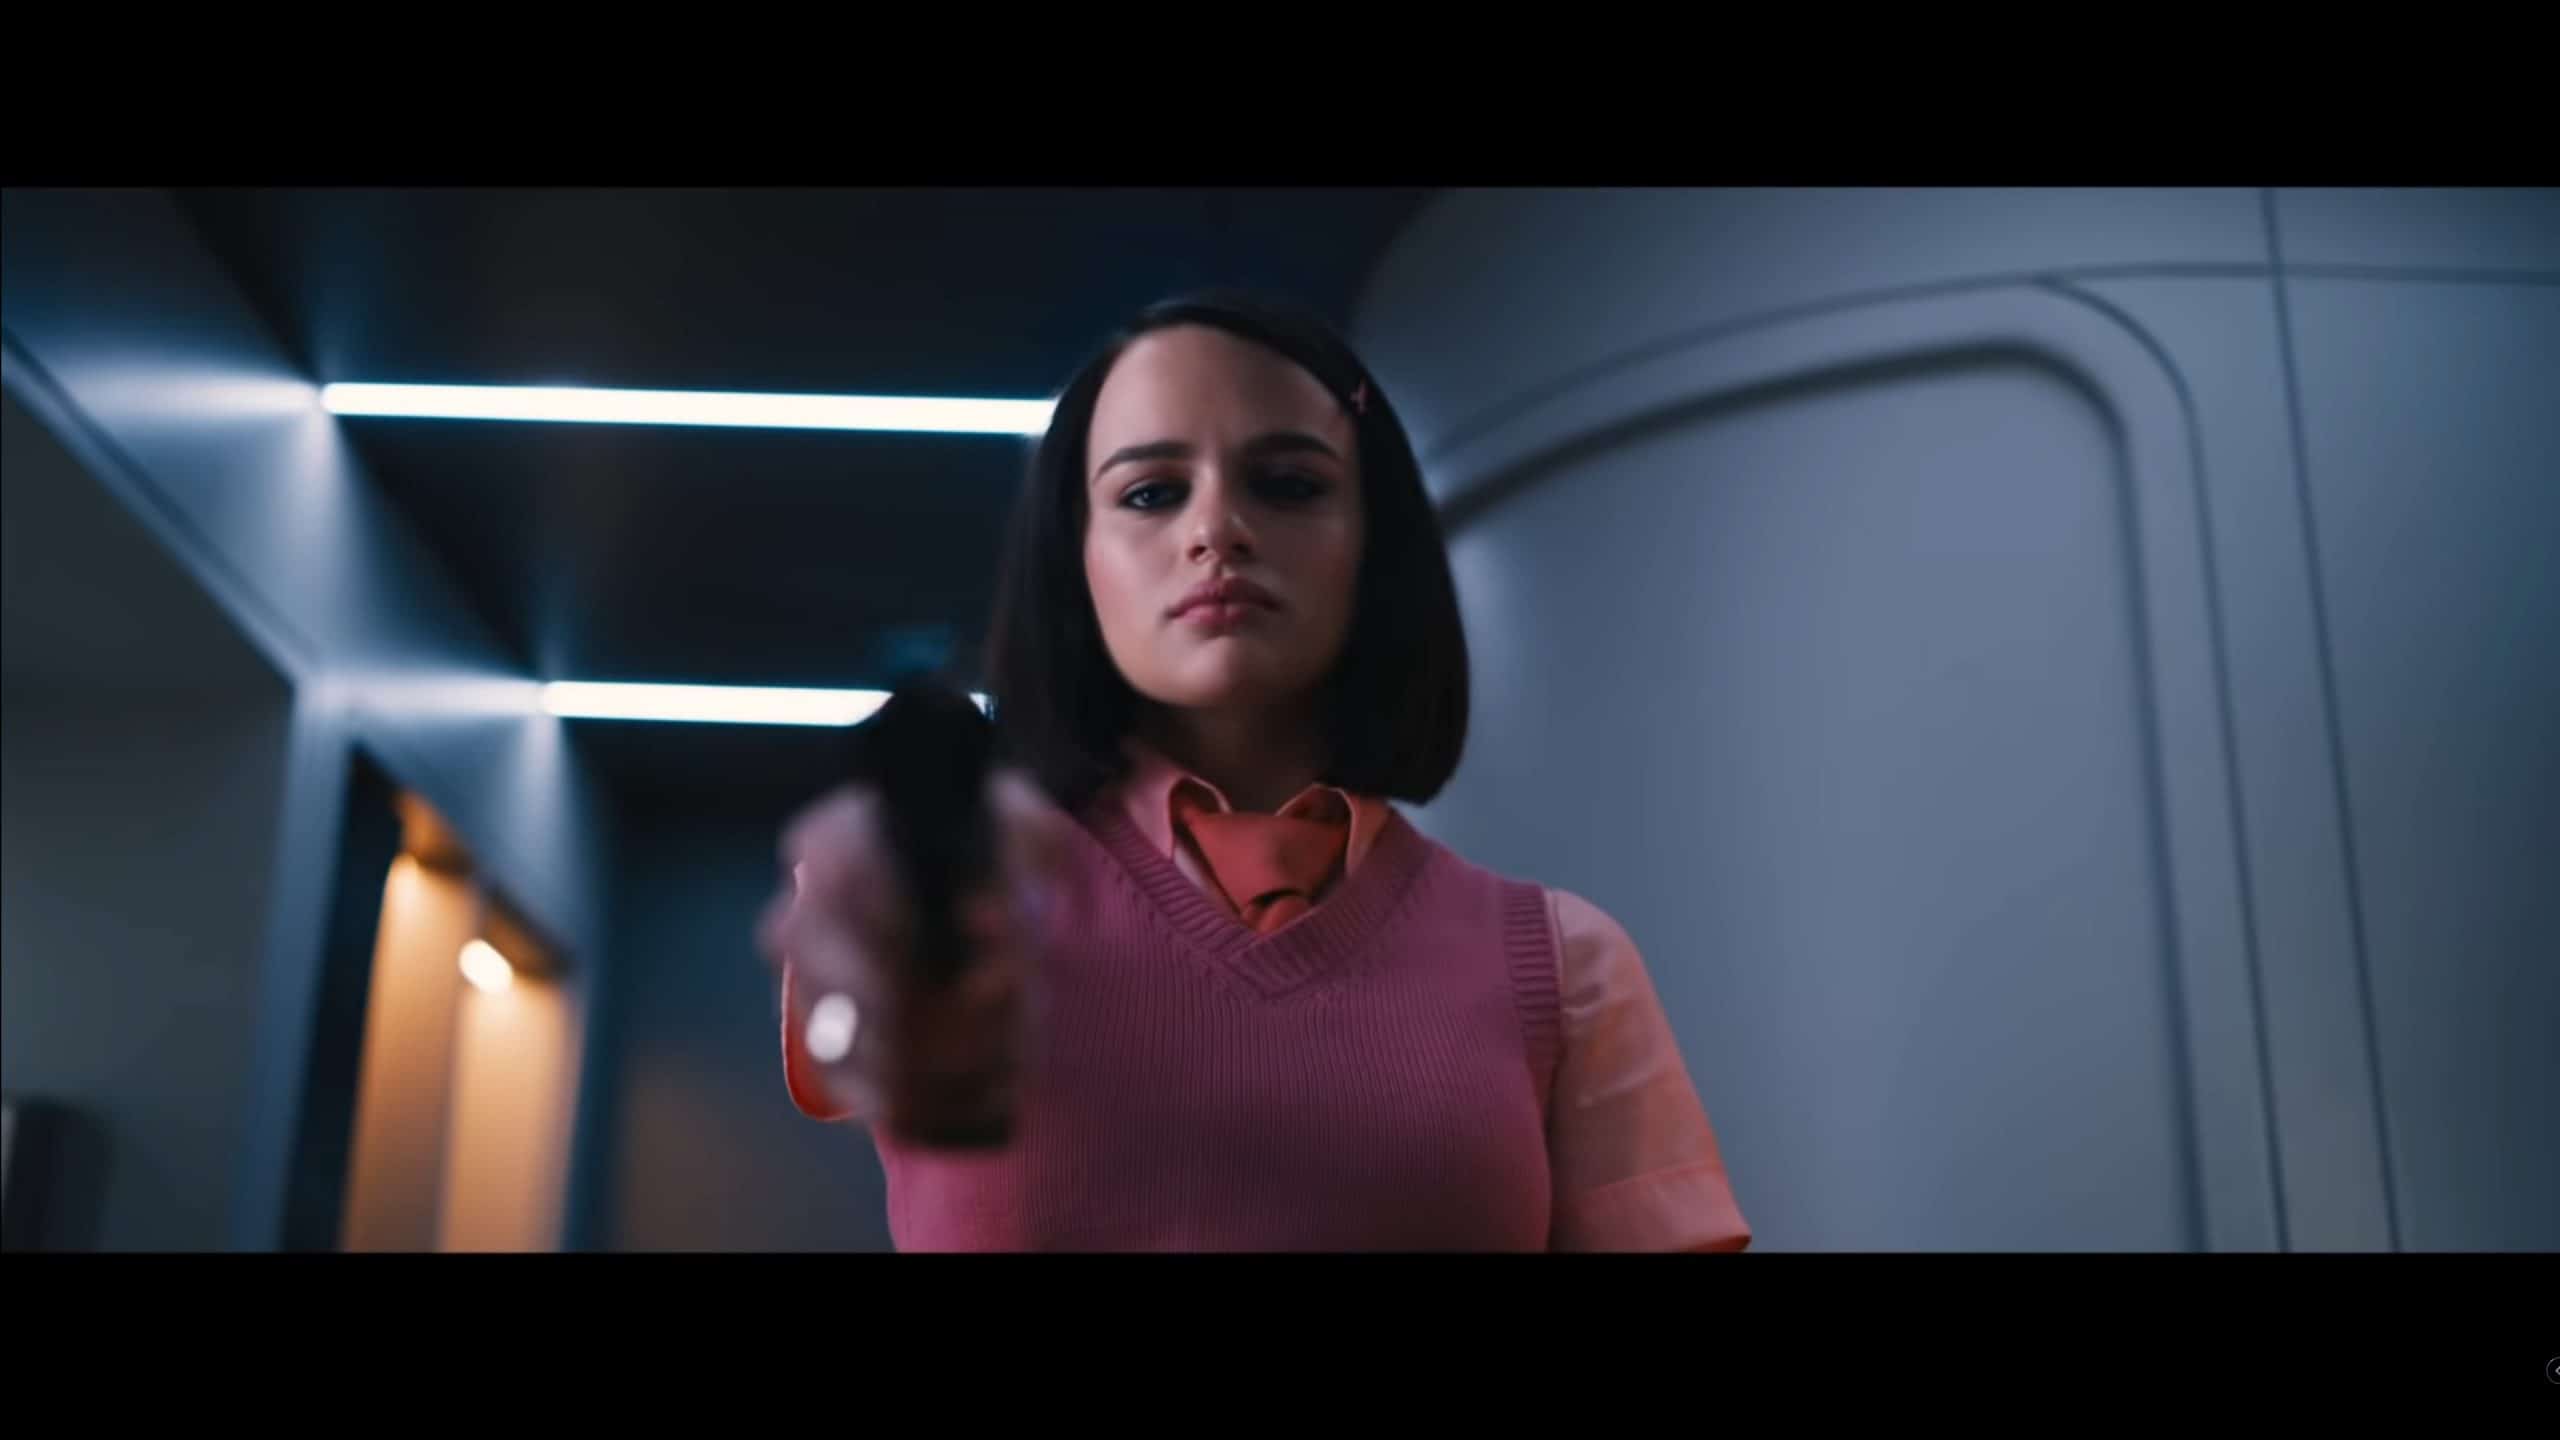 The Prince (Joey King) with a gun in hand